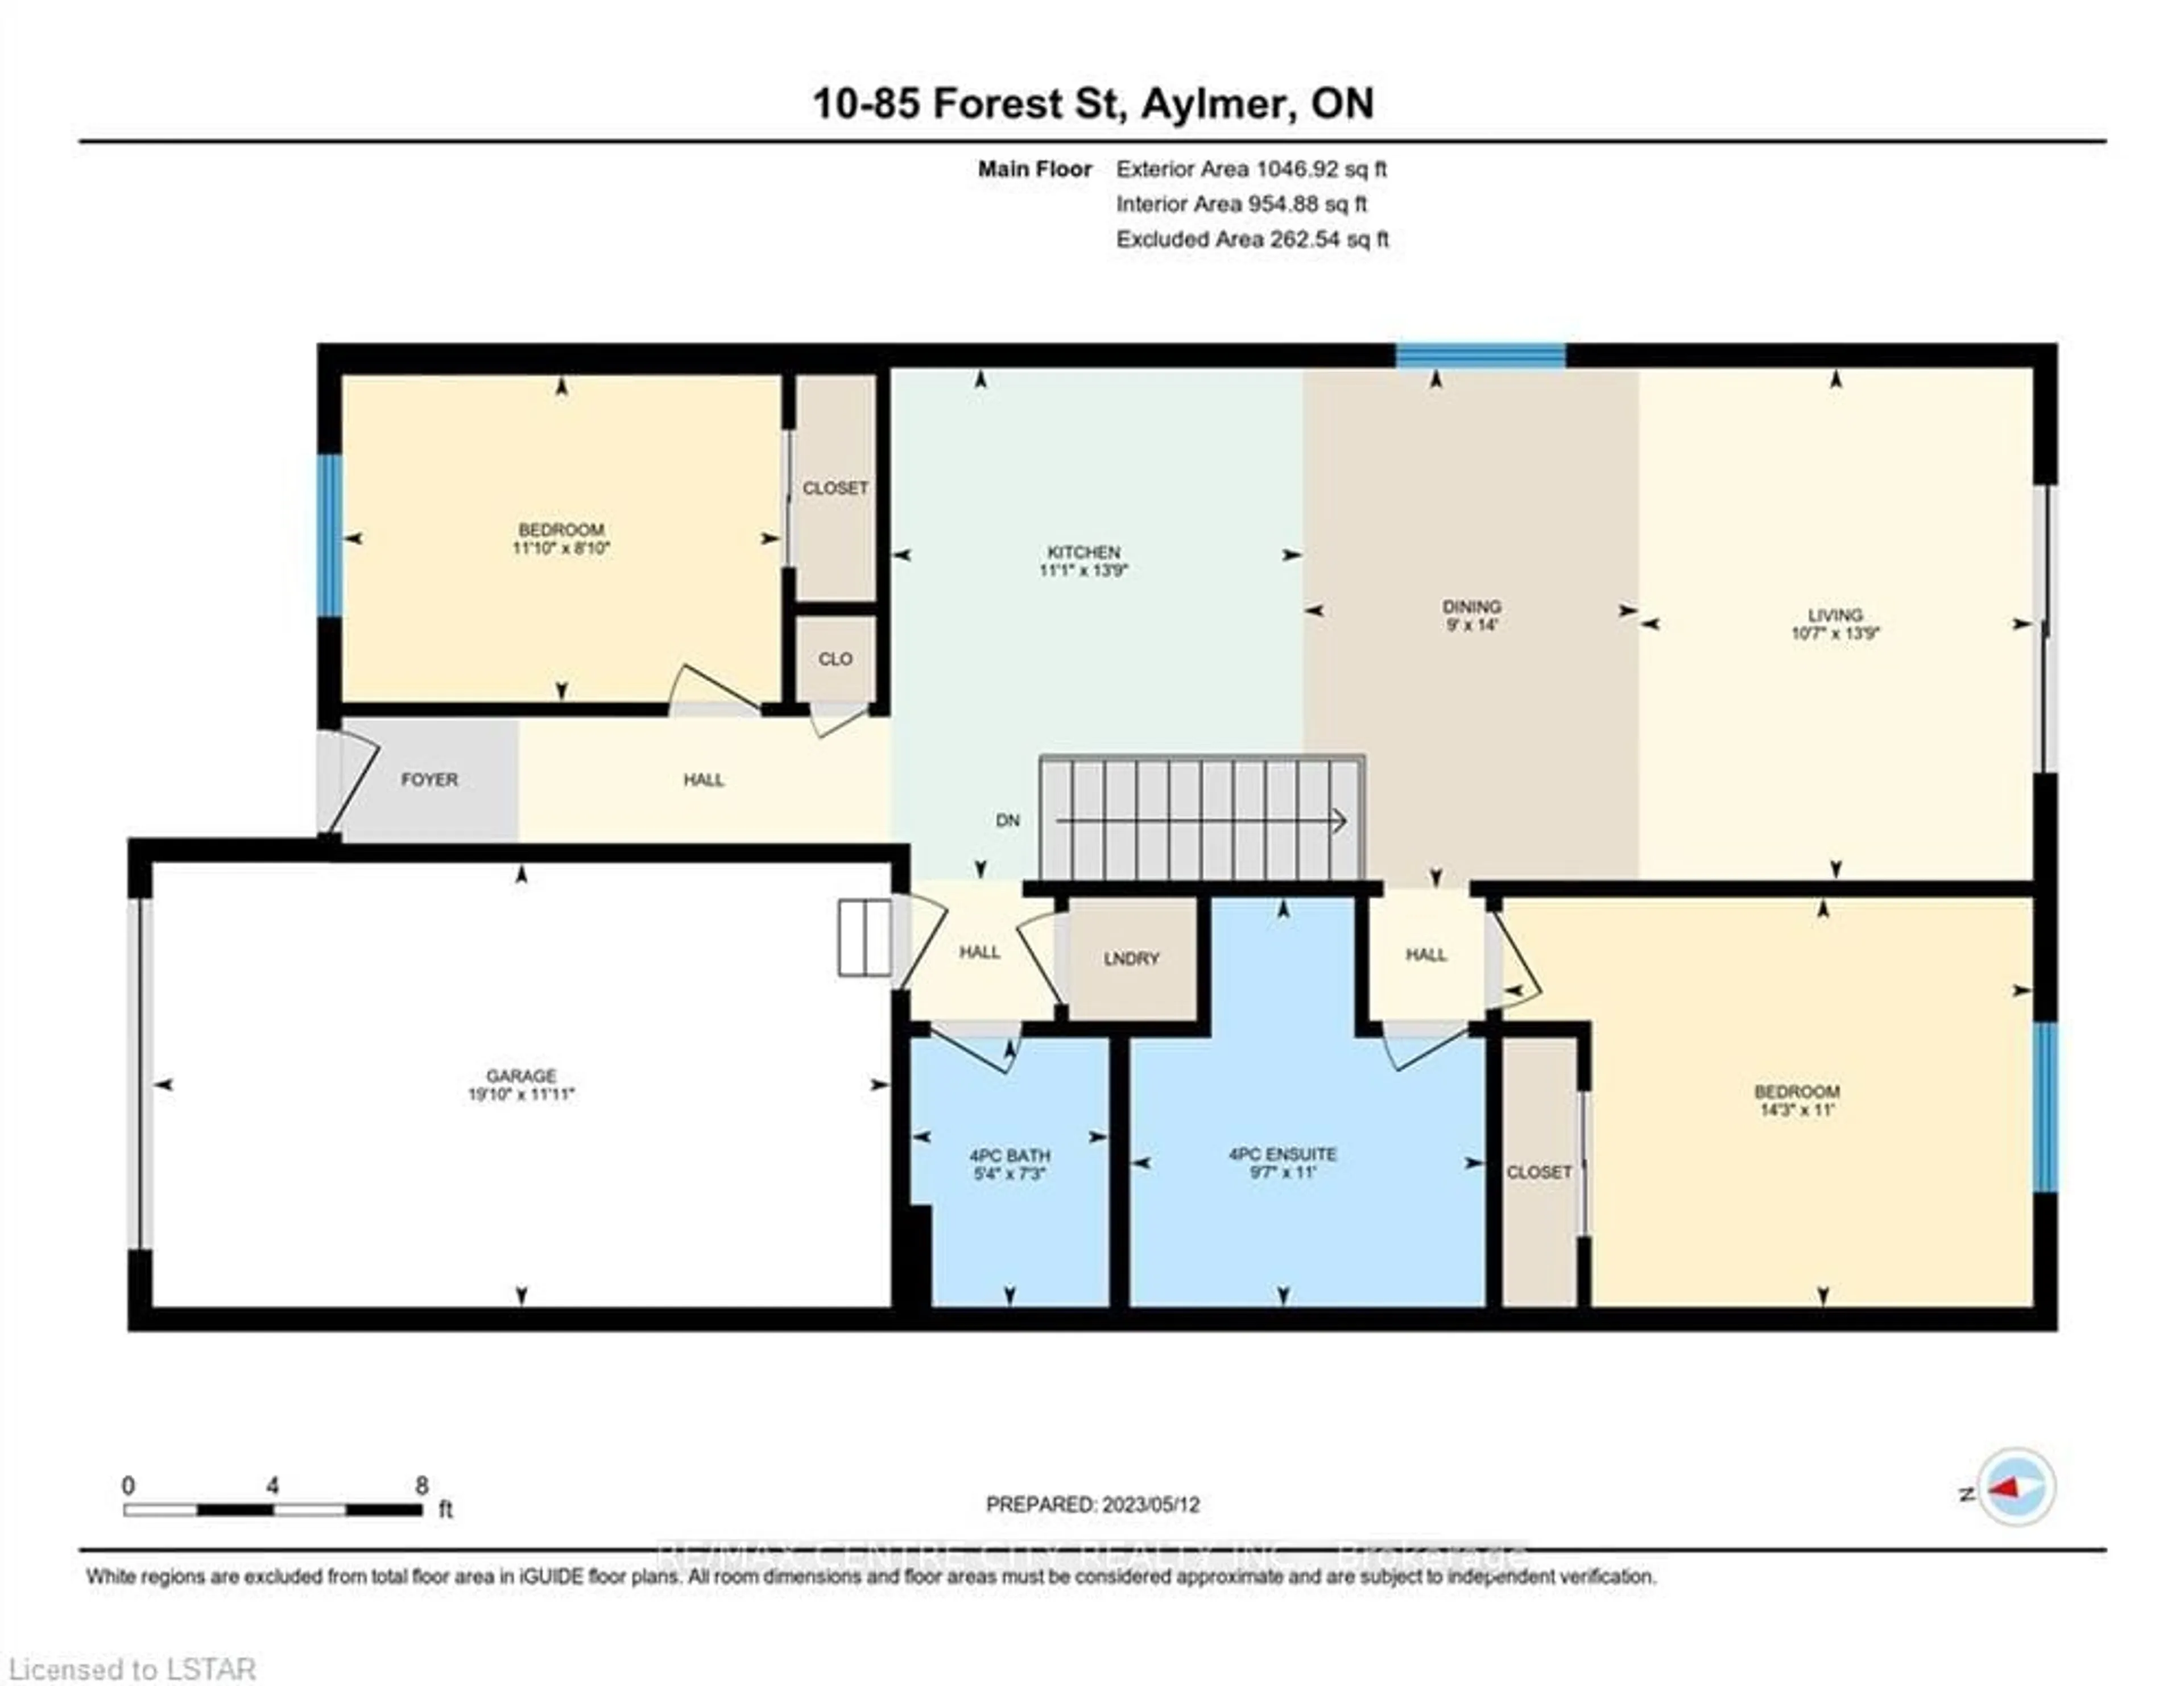 Floor plan for 85 Forest St #5, Aylmer Ontario N5H 1A5